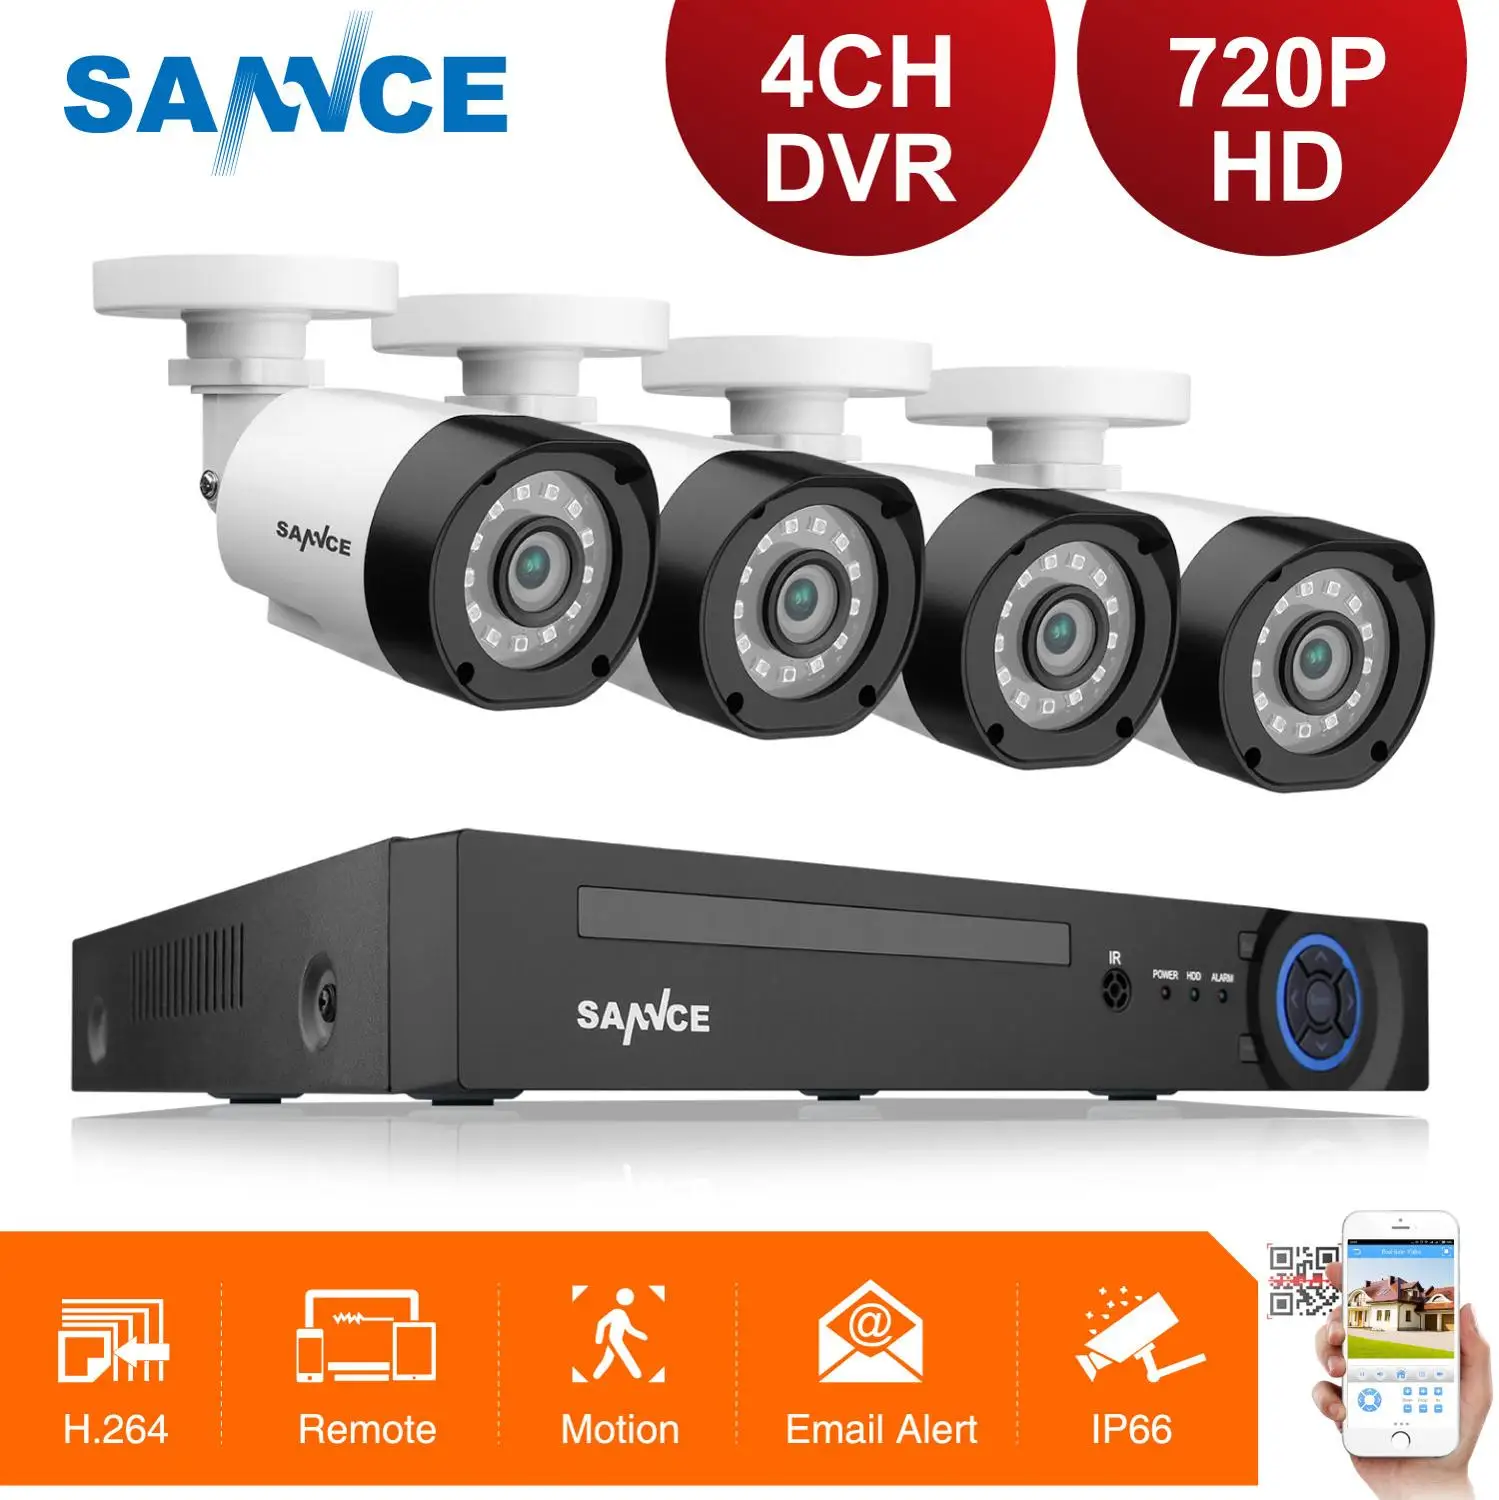 

SANNCE 4CH 720P CCTV Security Camera System 5IN1 HDMI DVR With 100W 4PCS Outdoor Weatherproof AHD Cameras Home Surveillance Kit